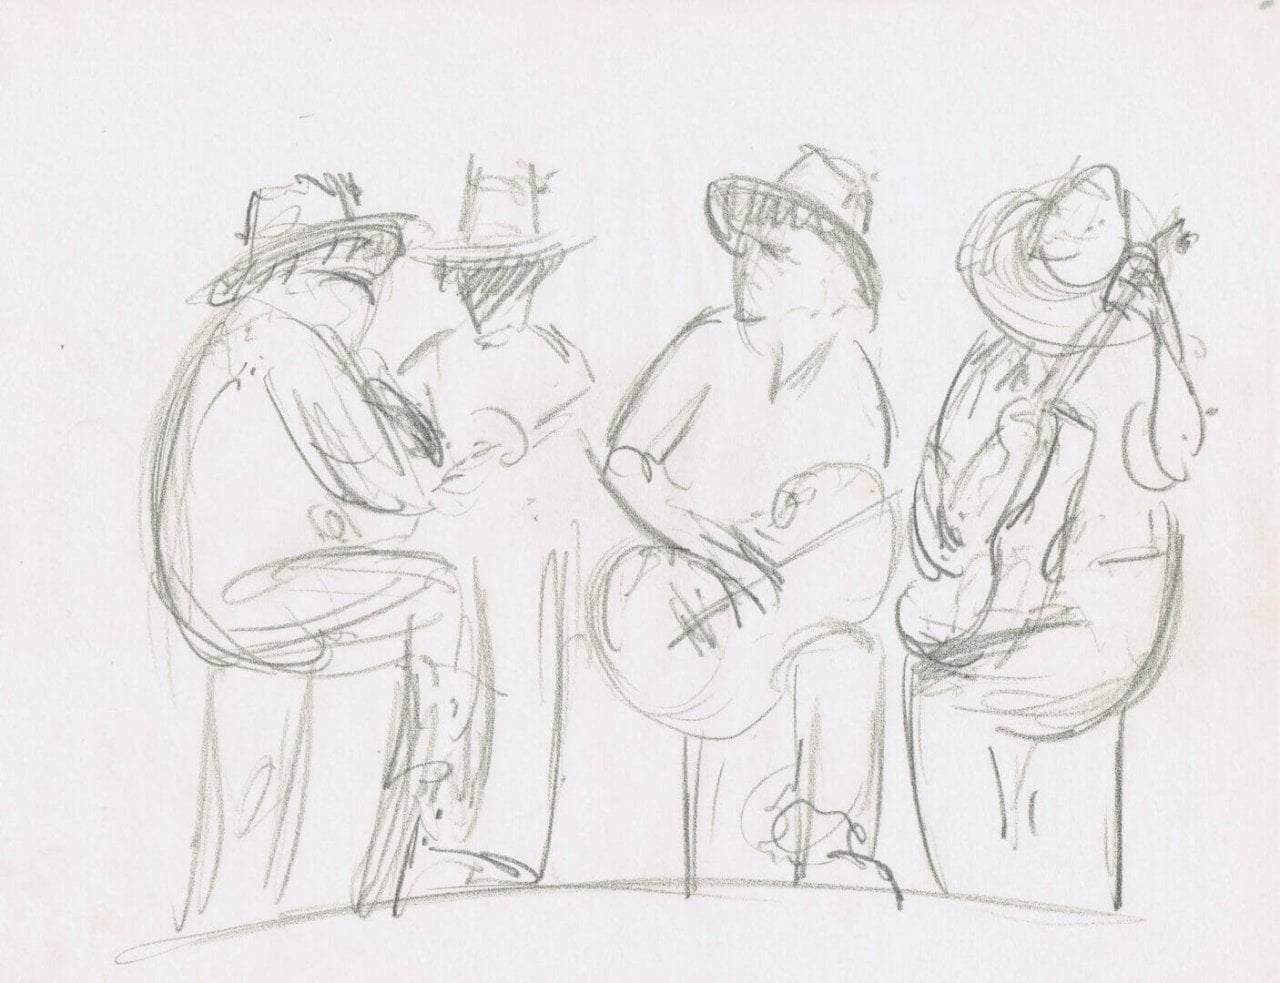 pencil sketch of four musicians with guitars